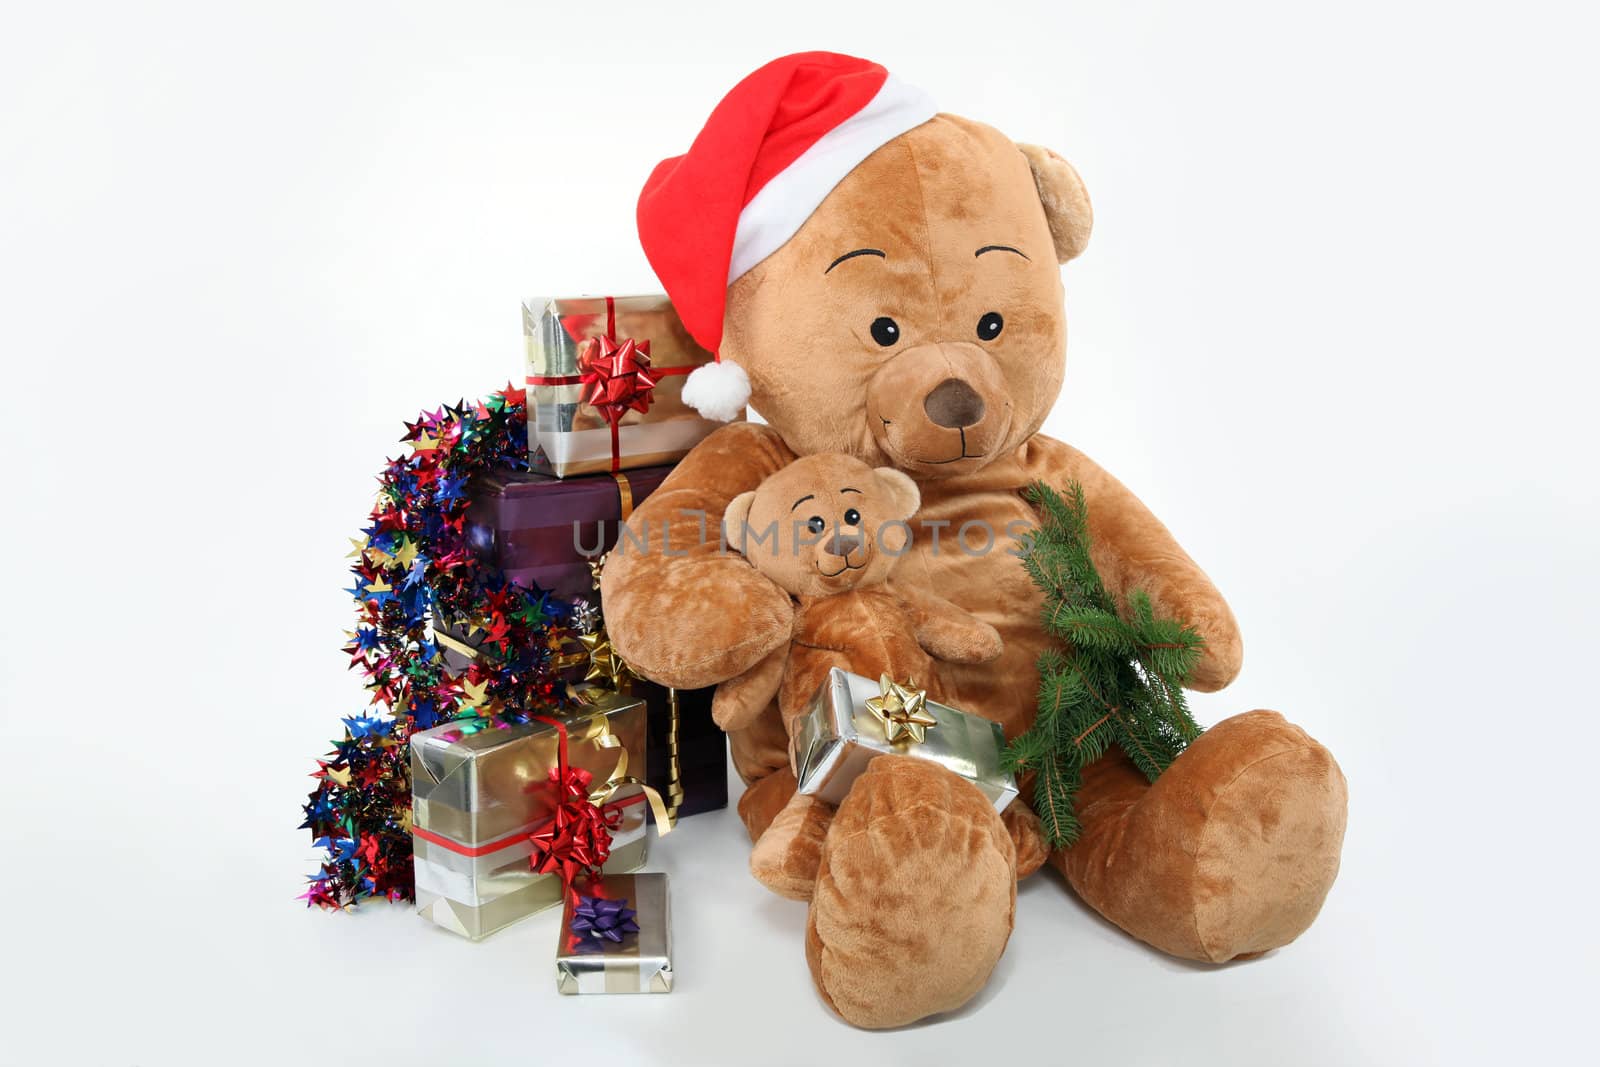 Huge teddy bear and Christmas gifts on white background